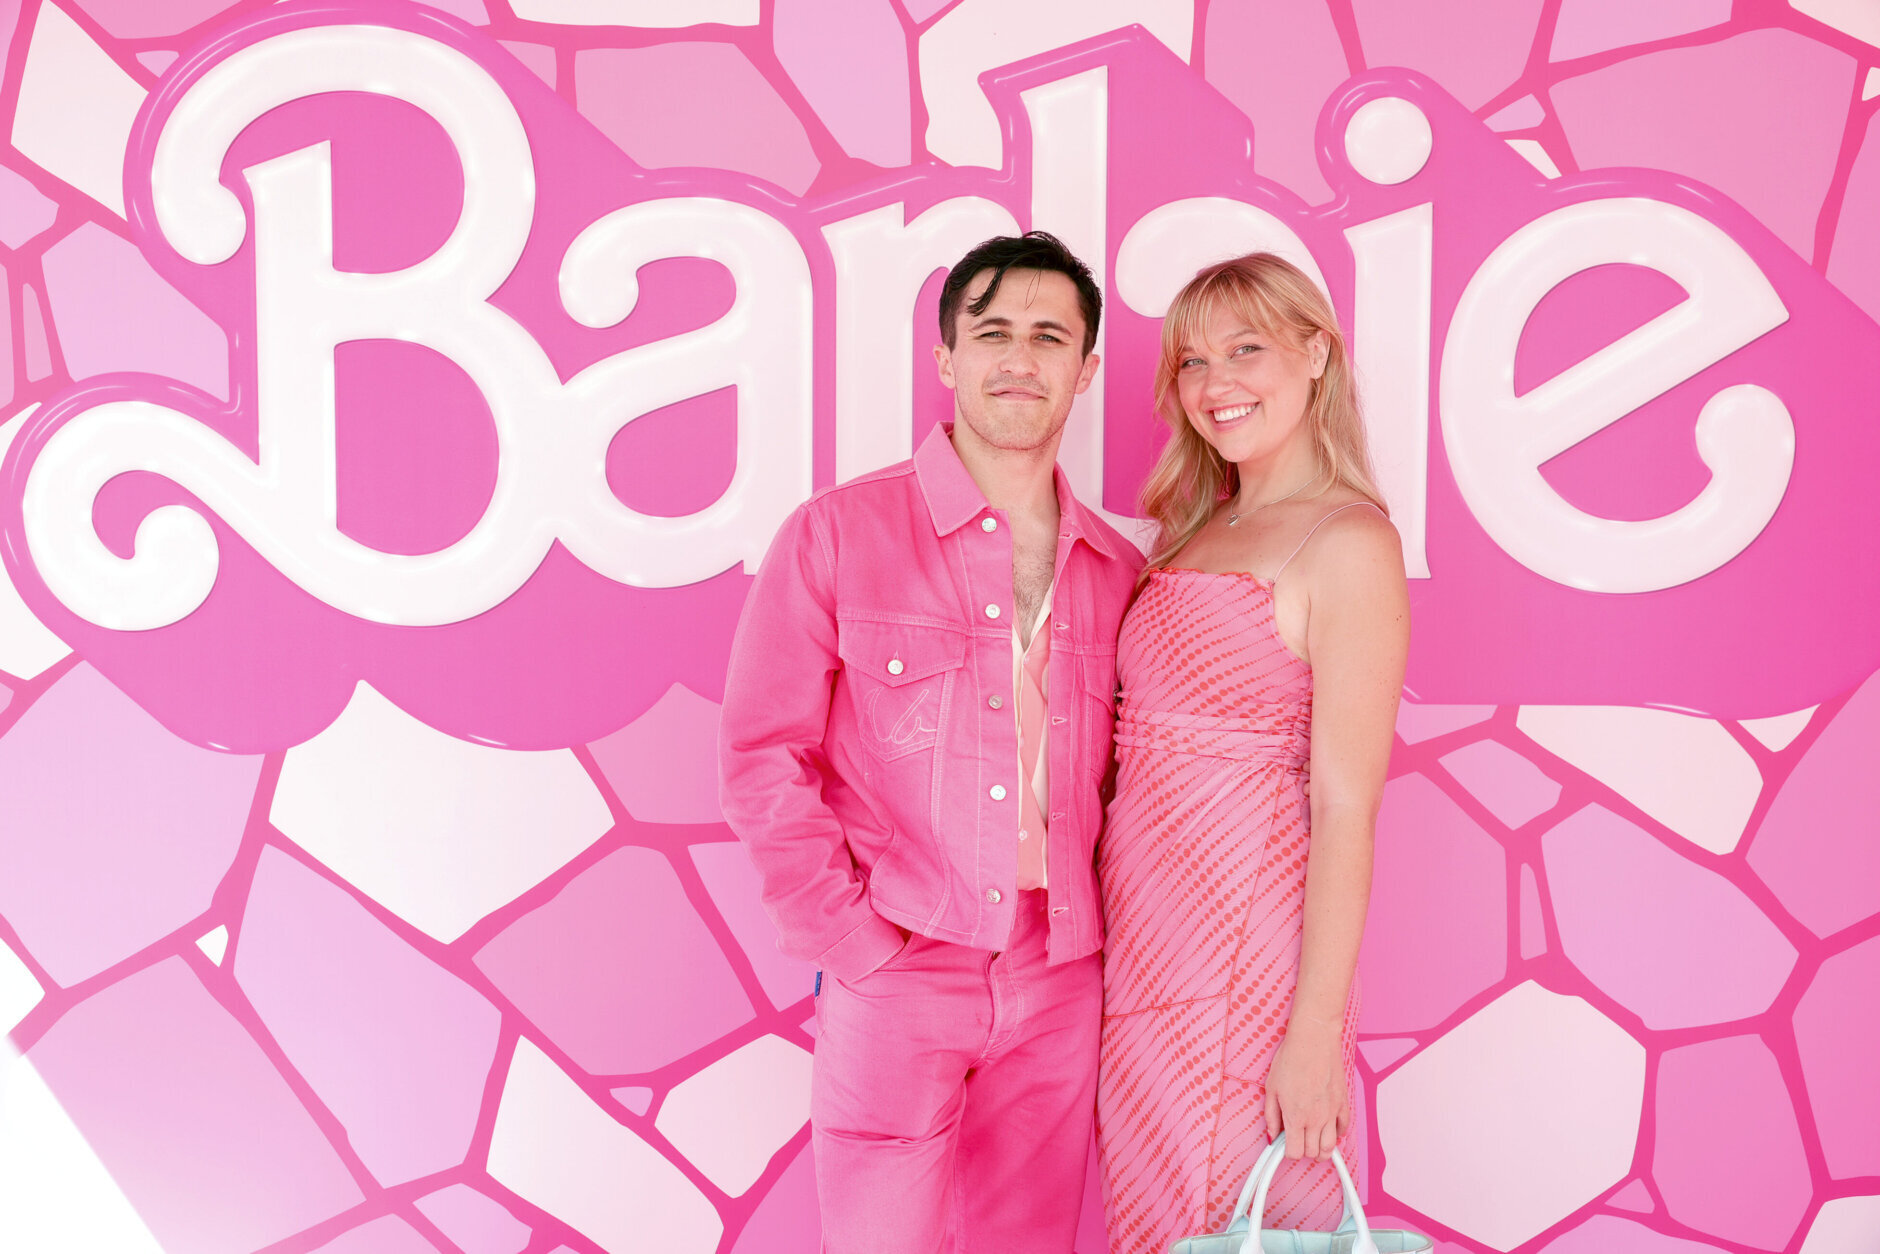 Barbie Movie: See All the Photos From Set